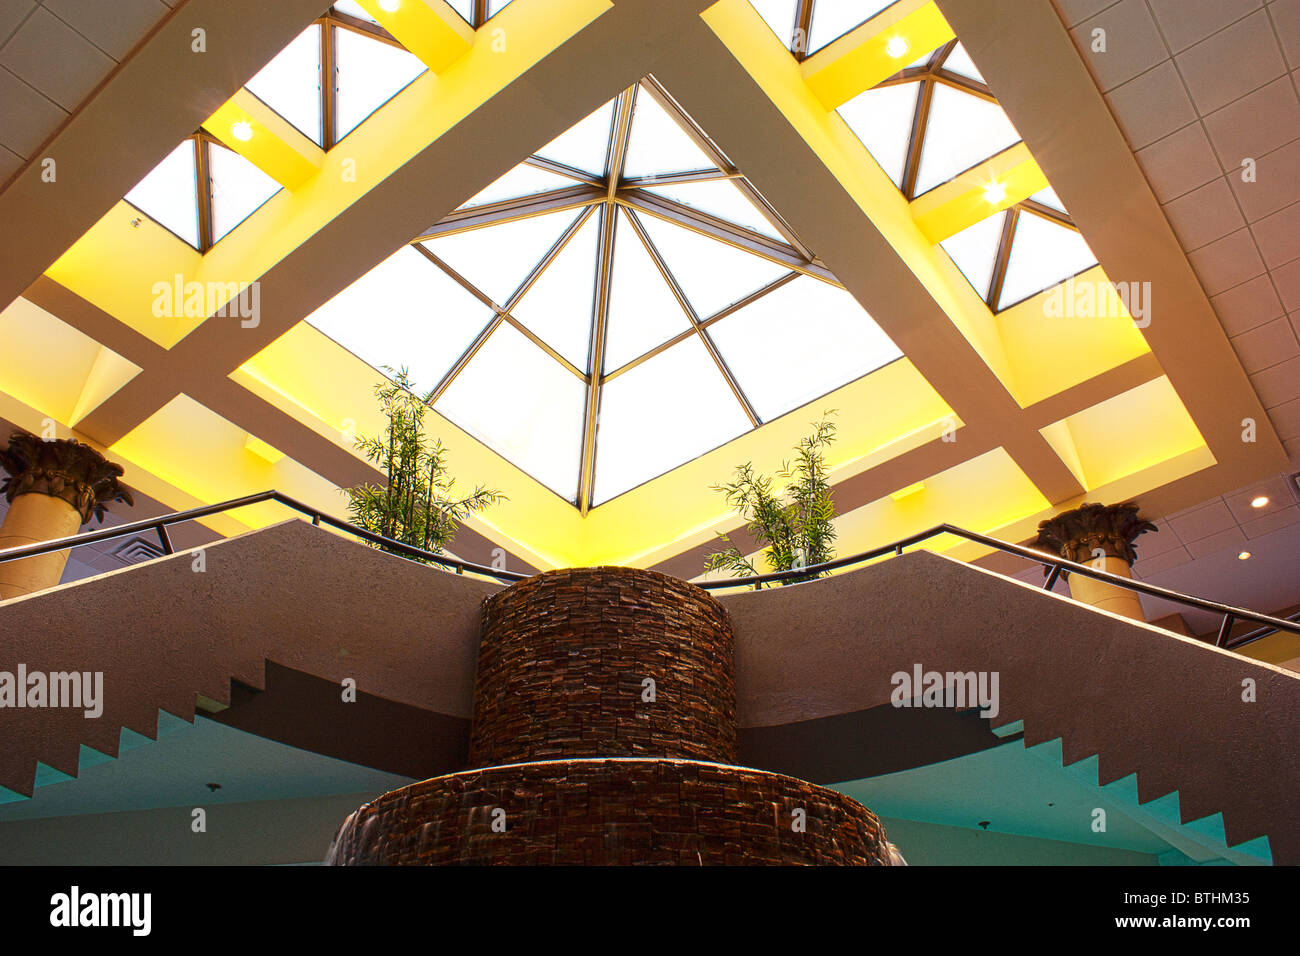 skylight ceiling building architecture interior Stock Photo